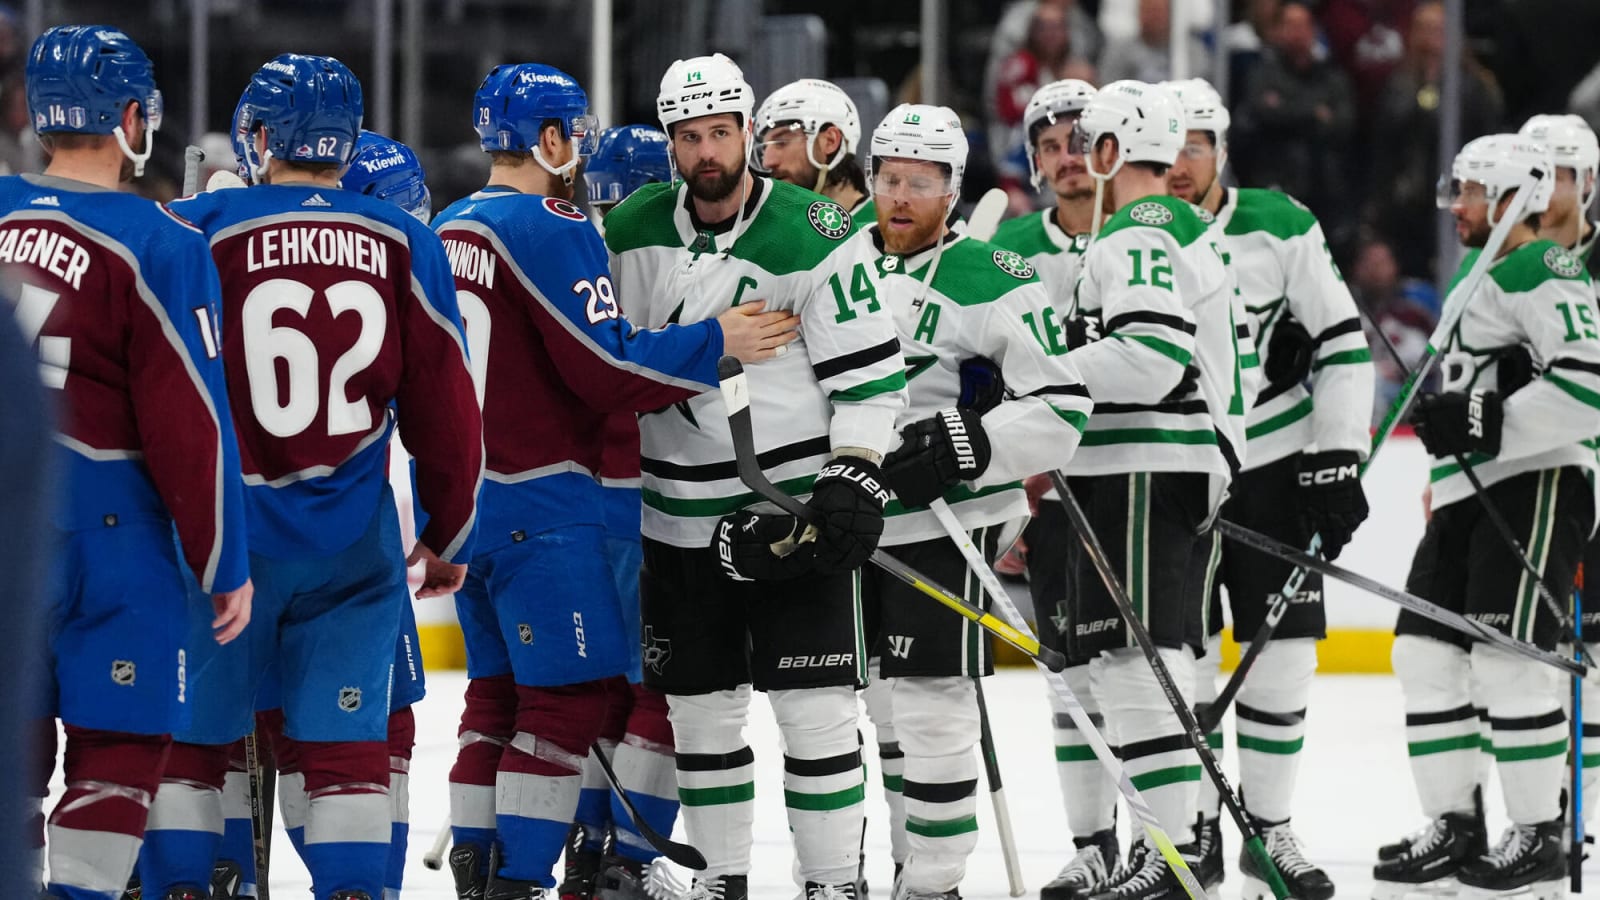 Rapid Reaction: The Avalanche Are Very Good, The Stars Are Just Better